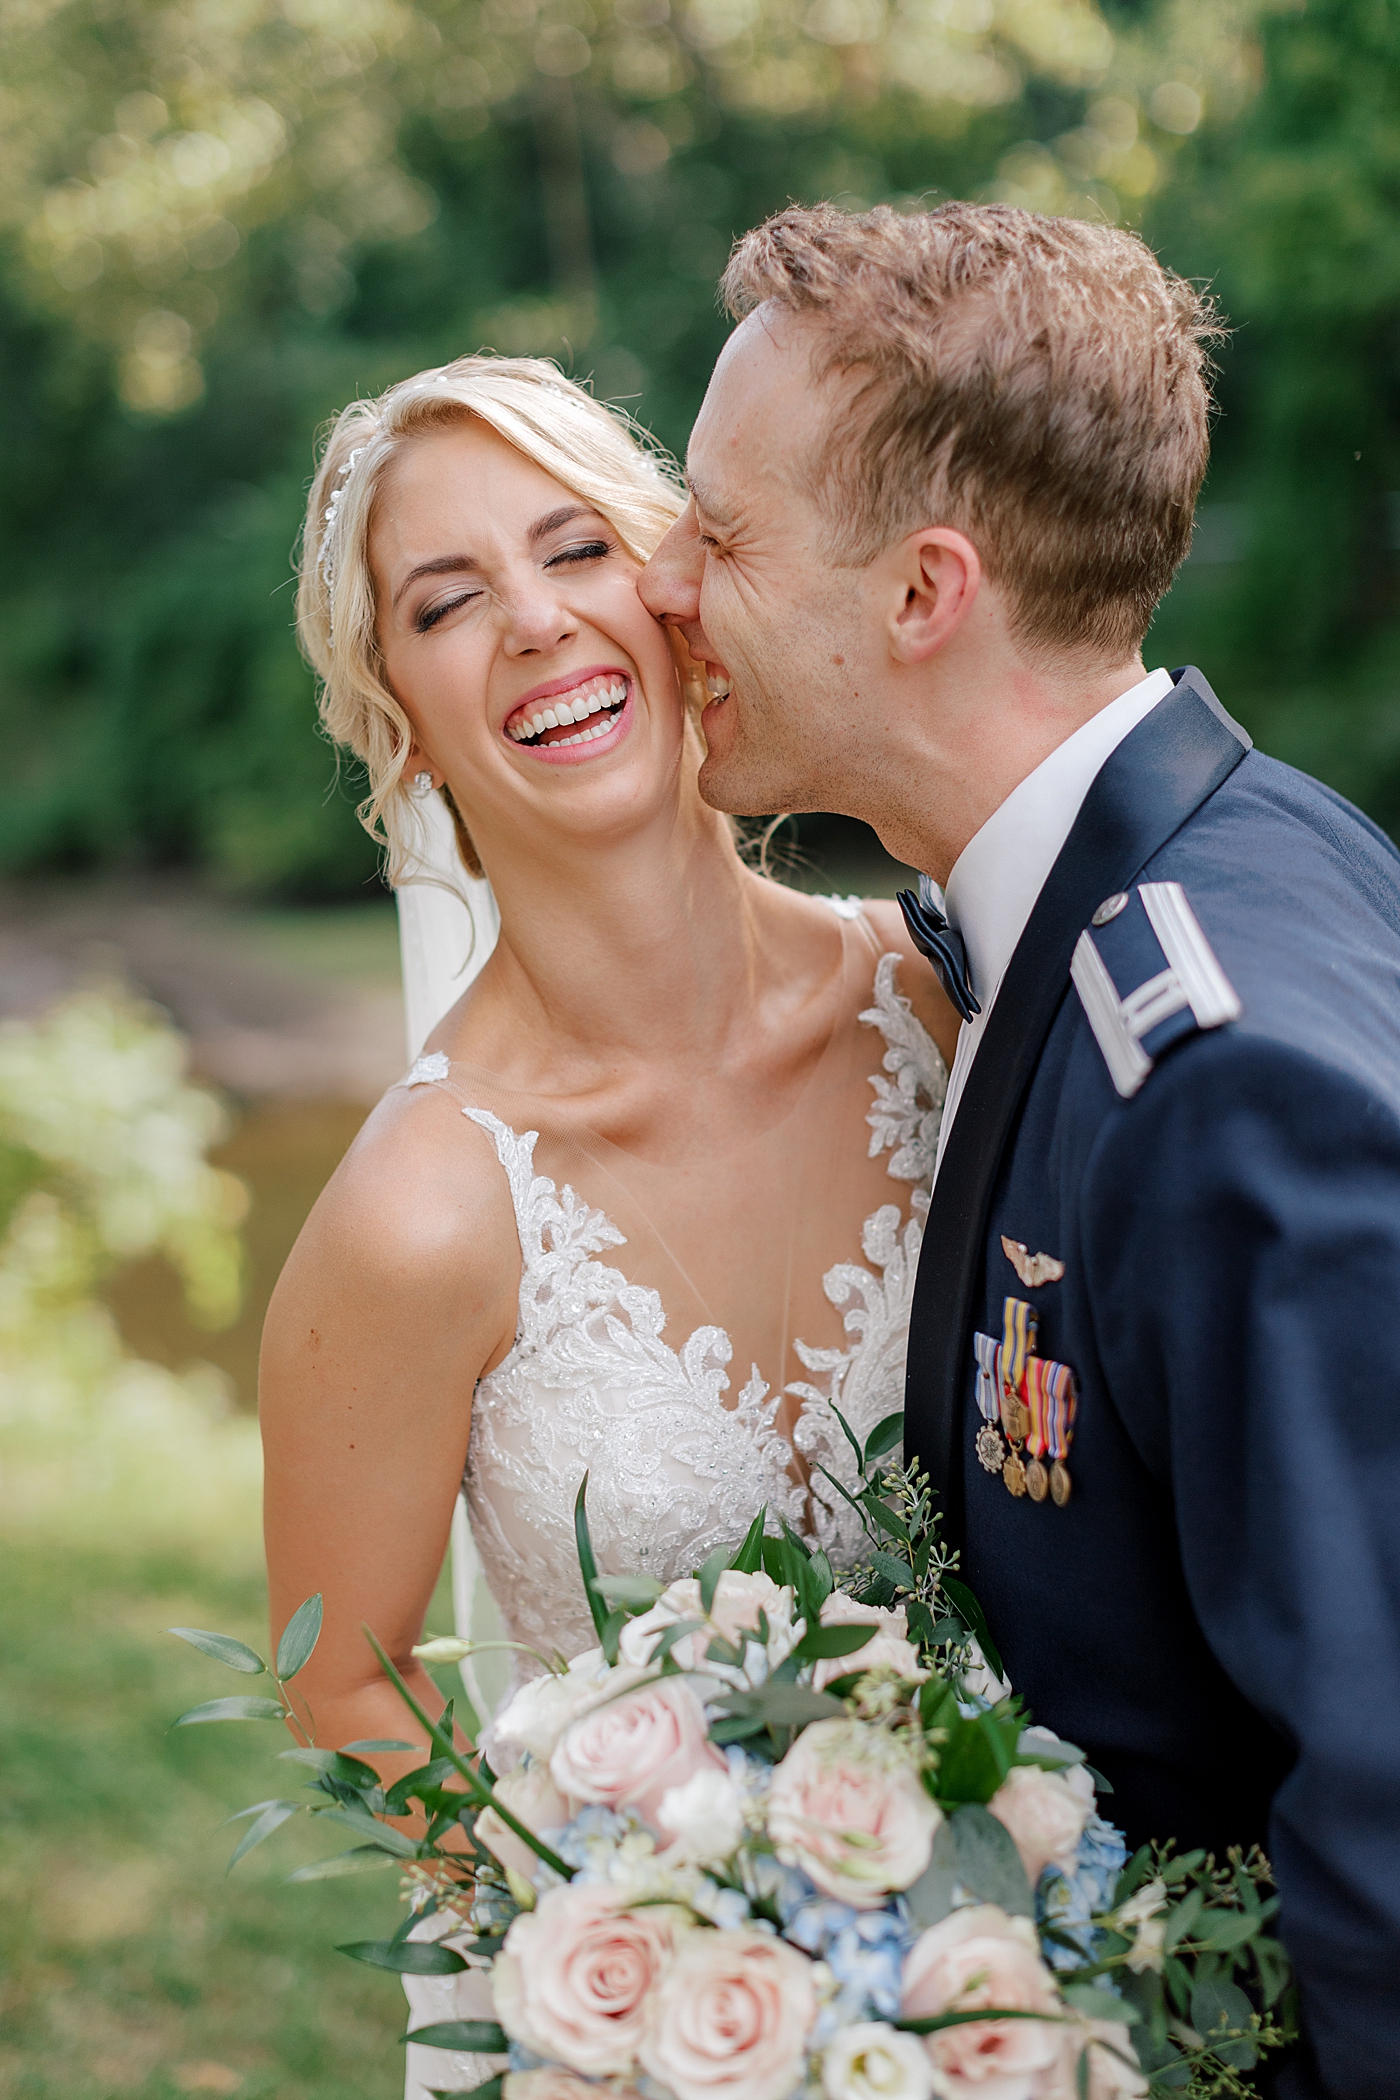 Bride and groom laughing | Image by Hope Helmuth Photography